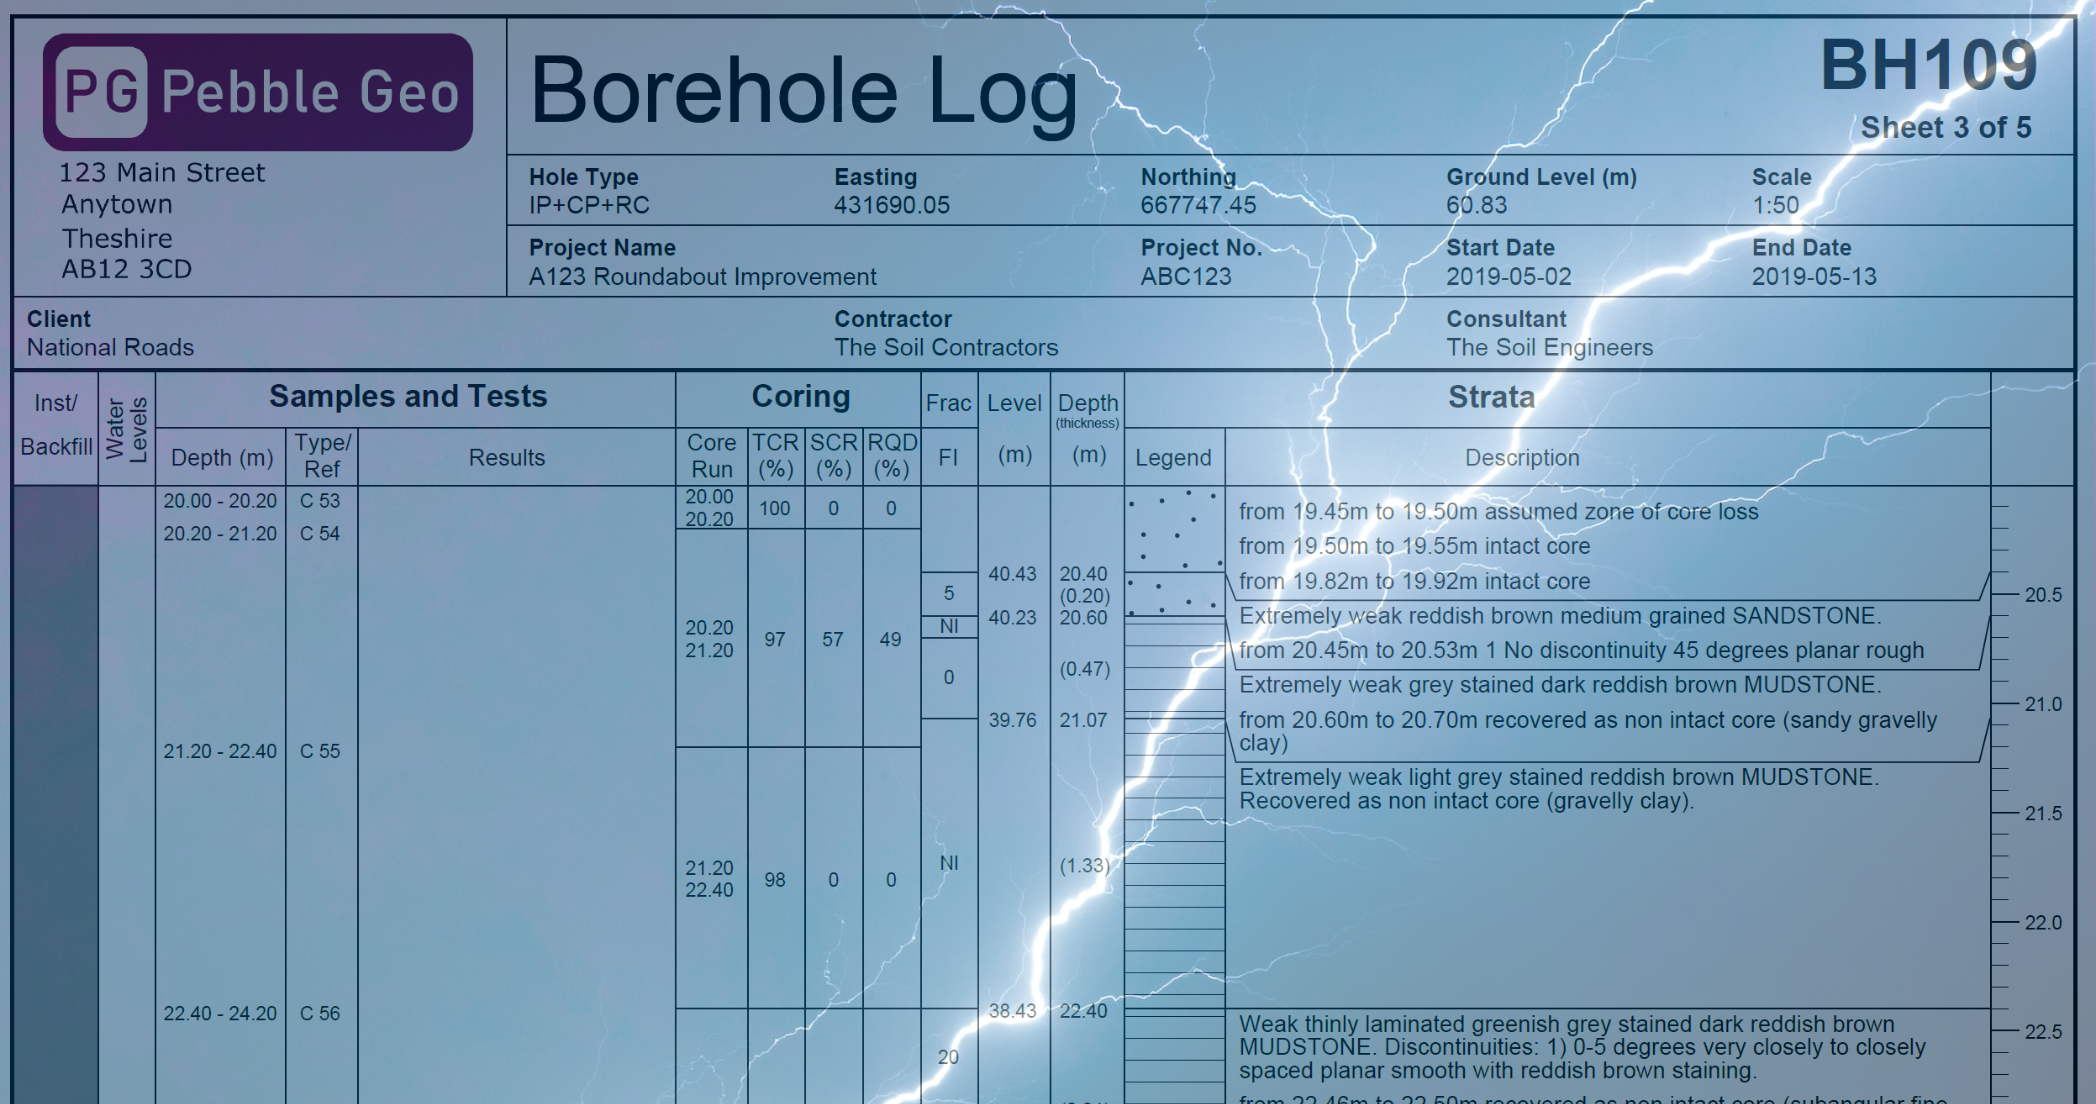 Image of a borehole log with a photo of lightening overlaid